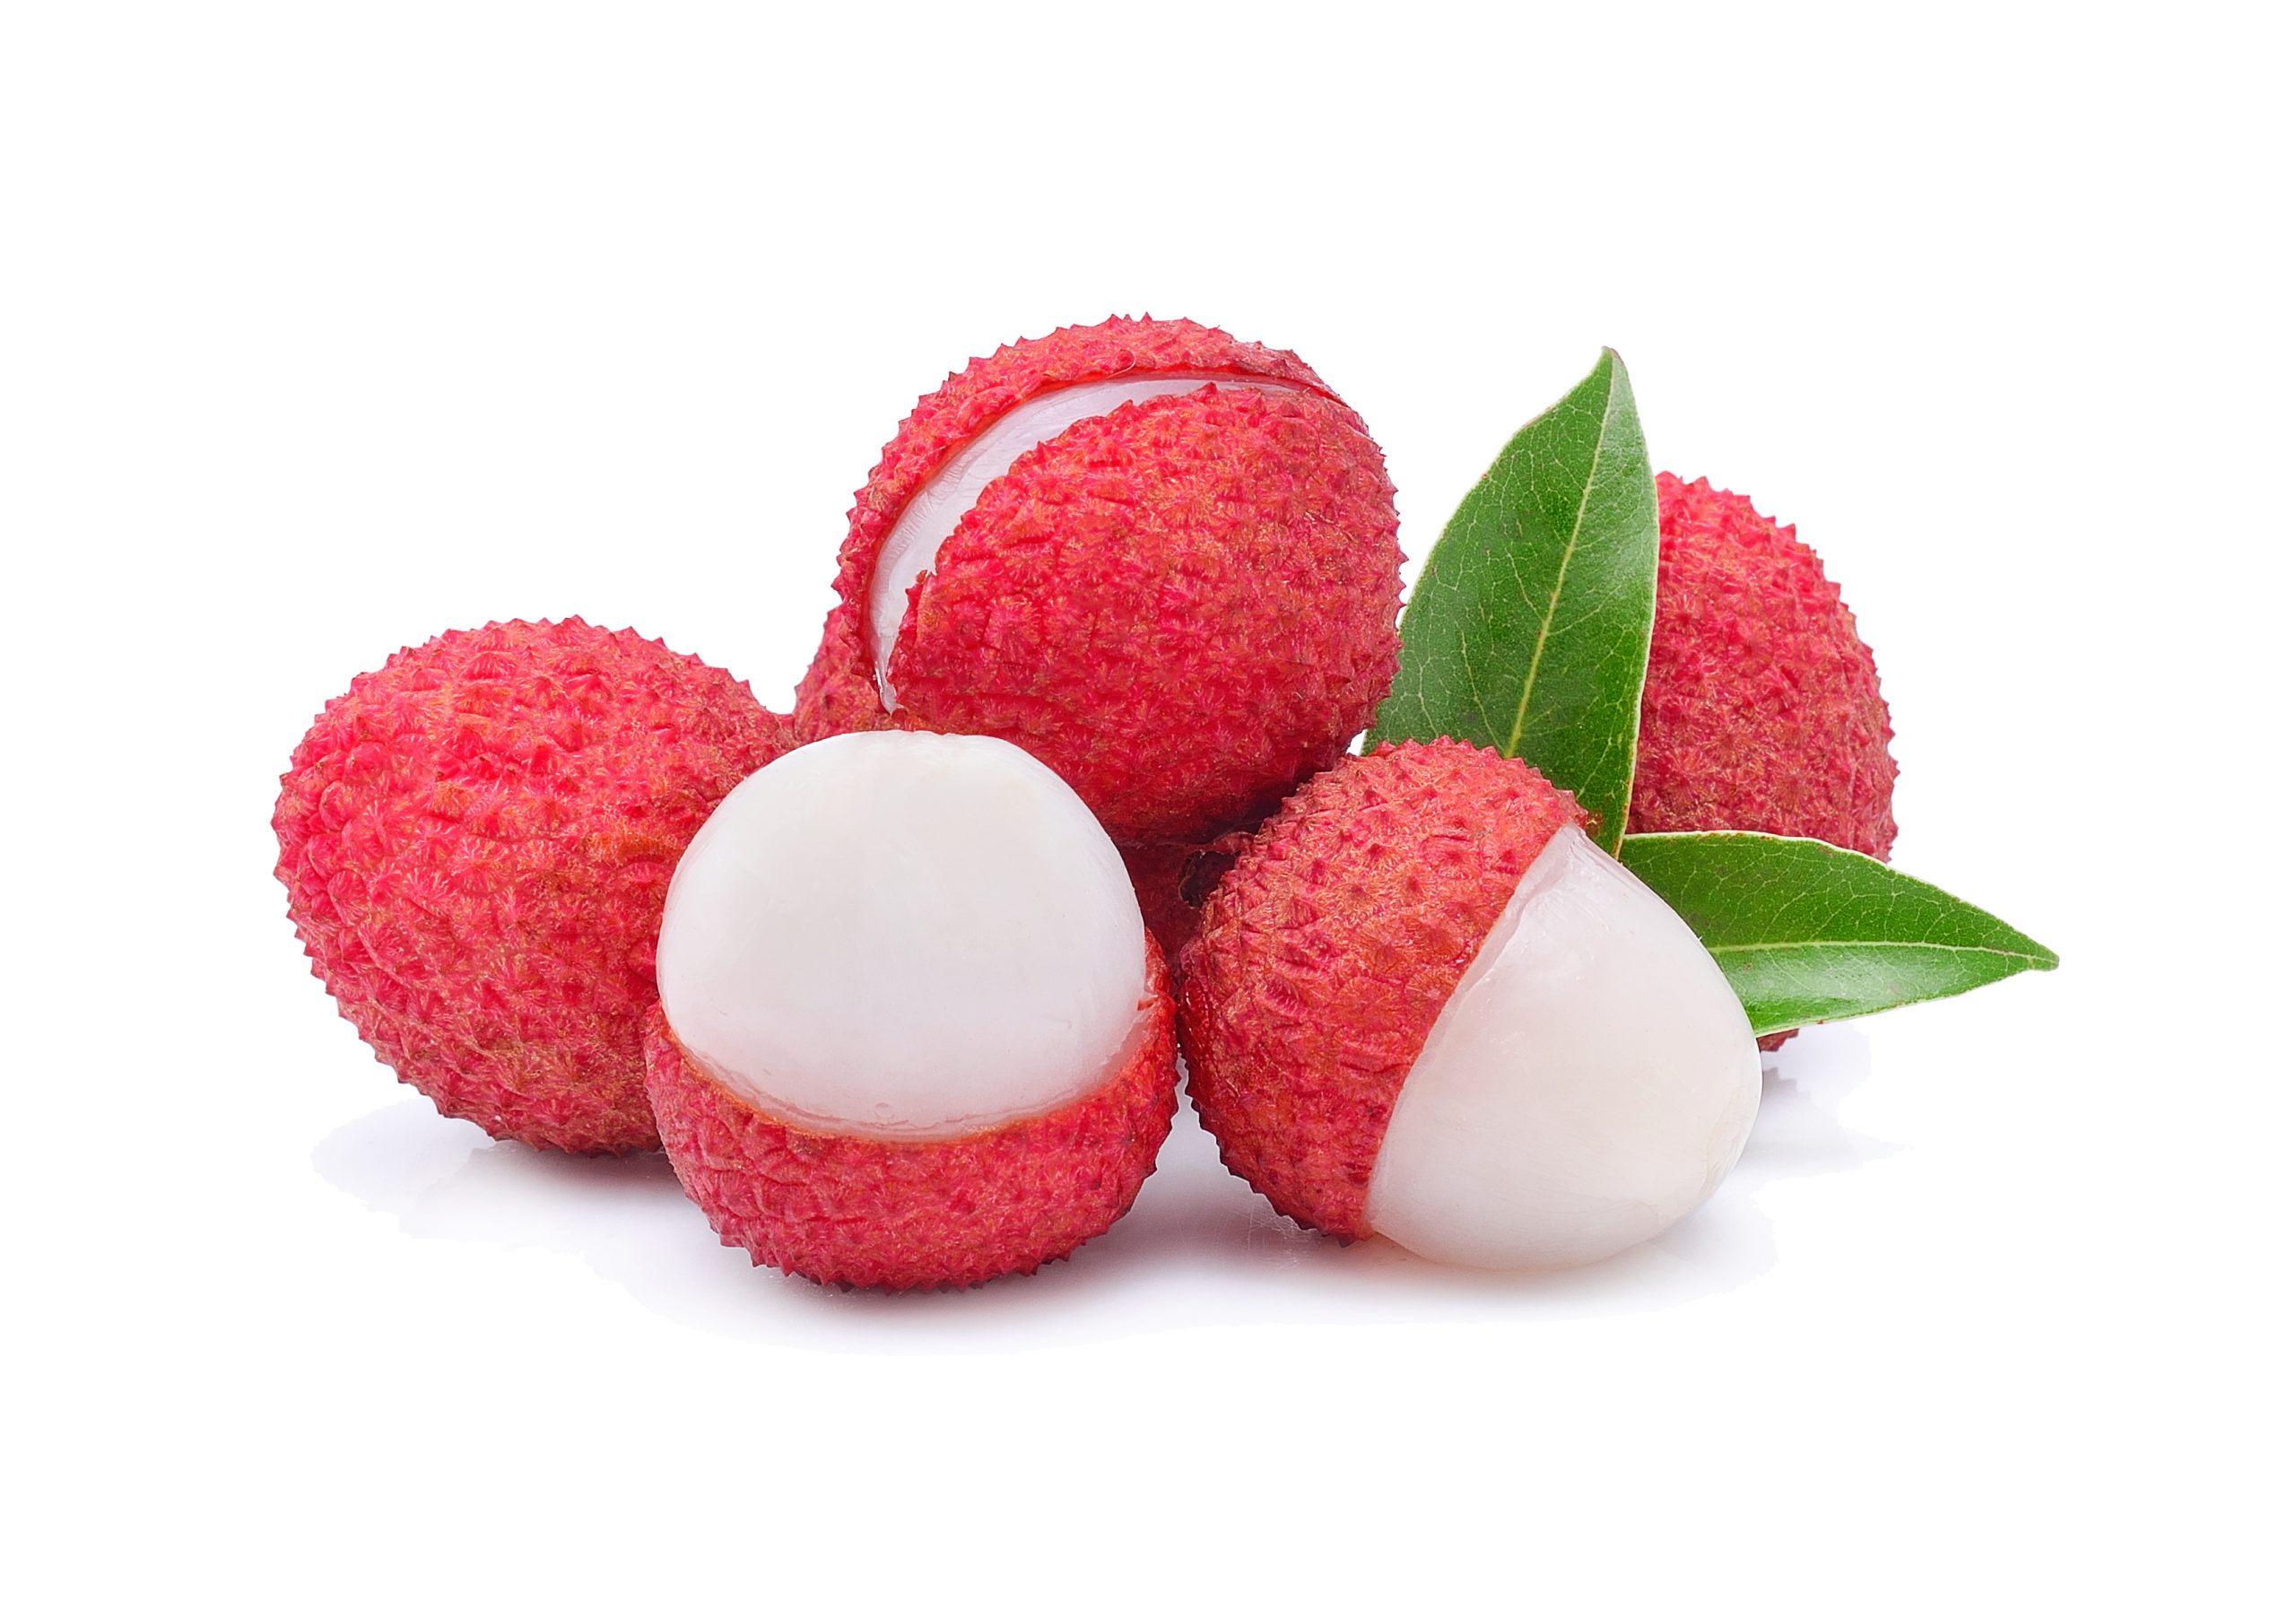 Litchi foods that start with L